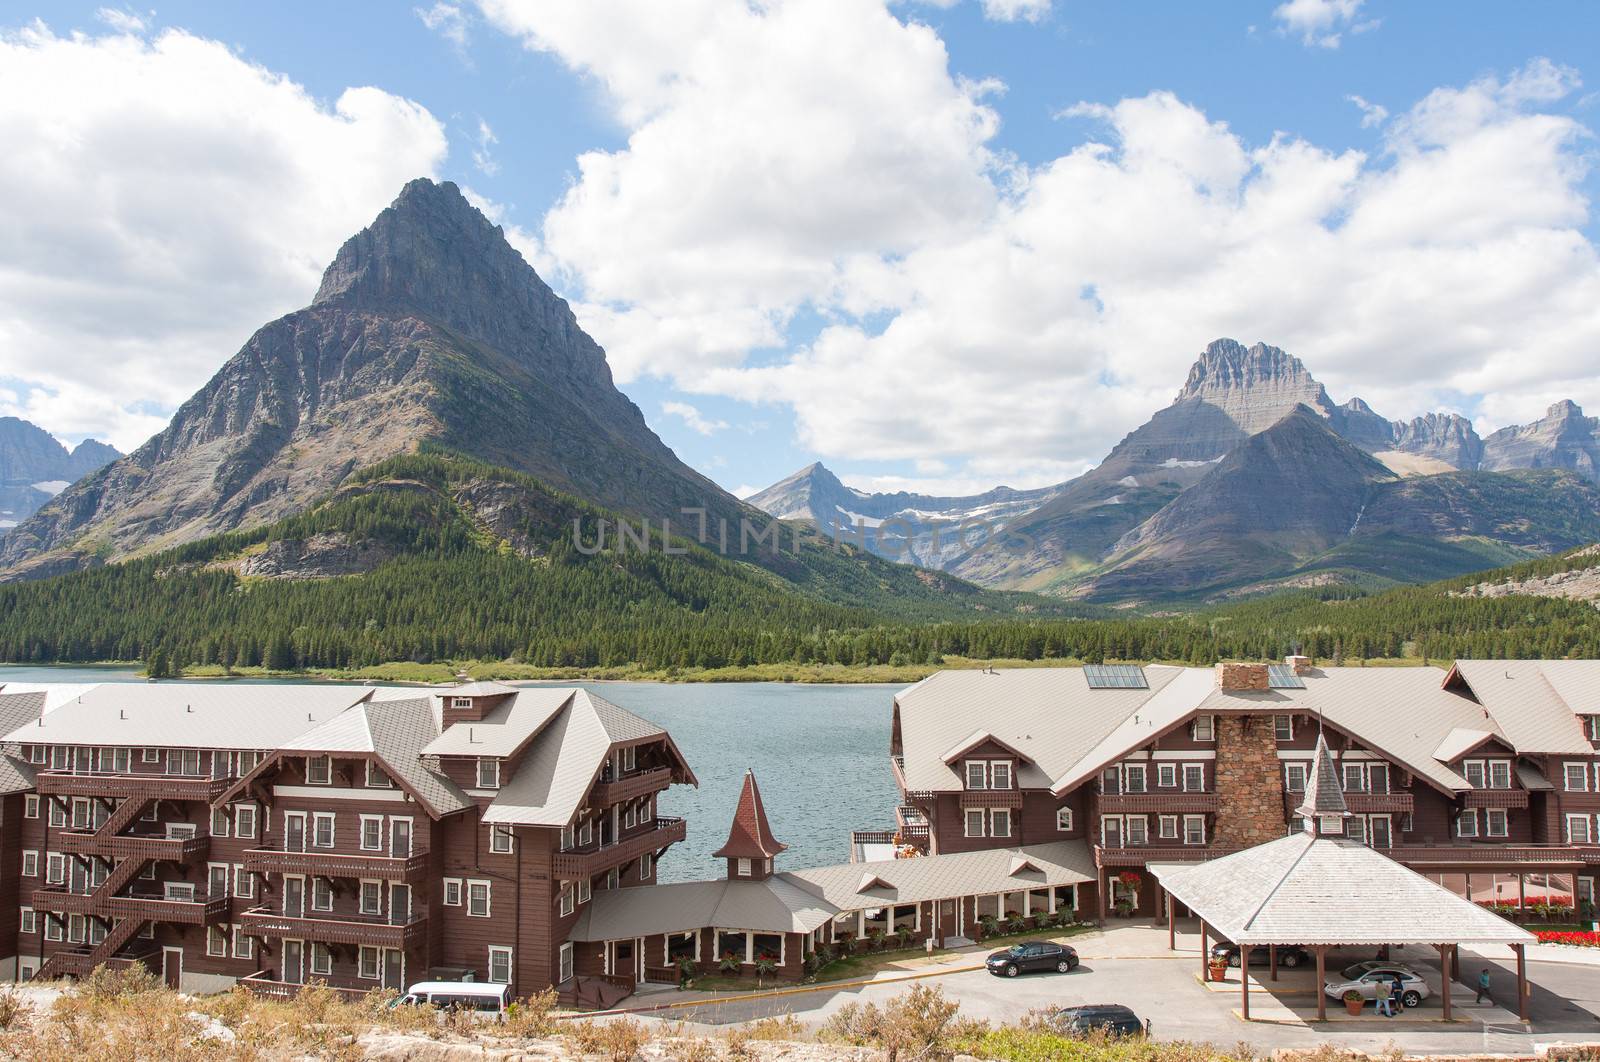 Opening in July 1915, the Many Glacier Hotel is a famous historic hotel in Glacier National Park. Located beside the Swiftcurrent Lake, it has fabulous views of mountain peaks on the continental divide. Grinnell Point is seen directly behind the hotel.